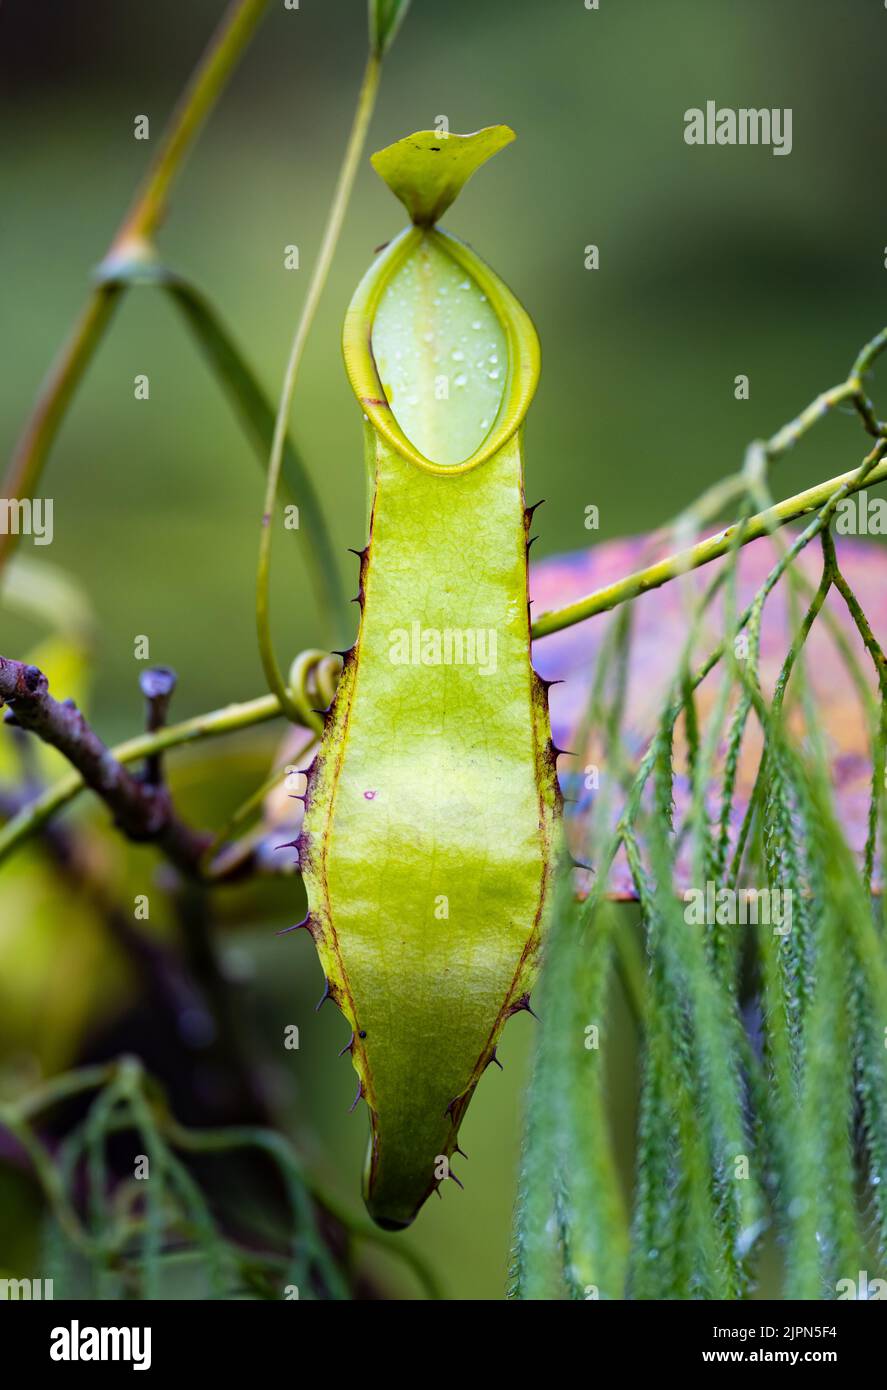 Carnivorous Pitcher plant Nepenthes in the wild. Lore Lindu National Park, Sulawesi, Indonesia. Stock Photo